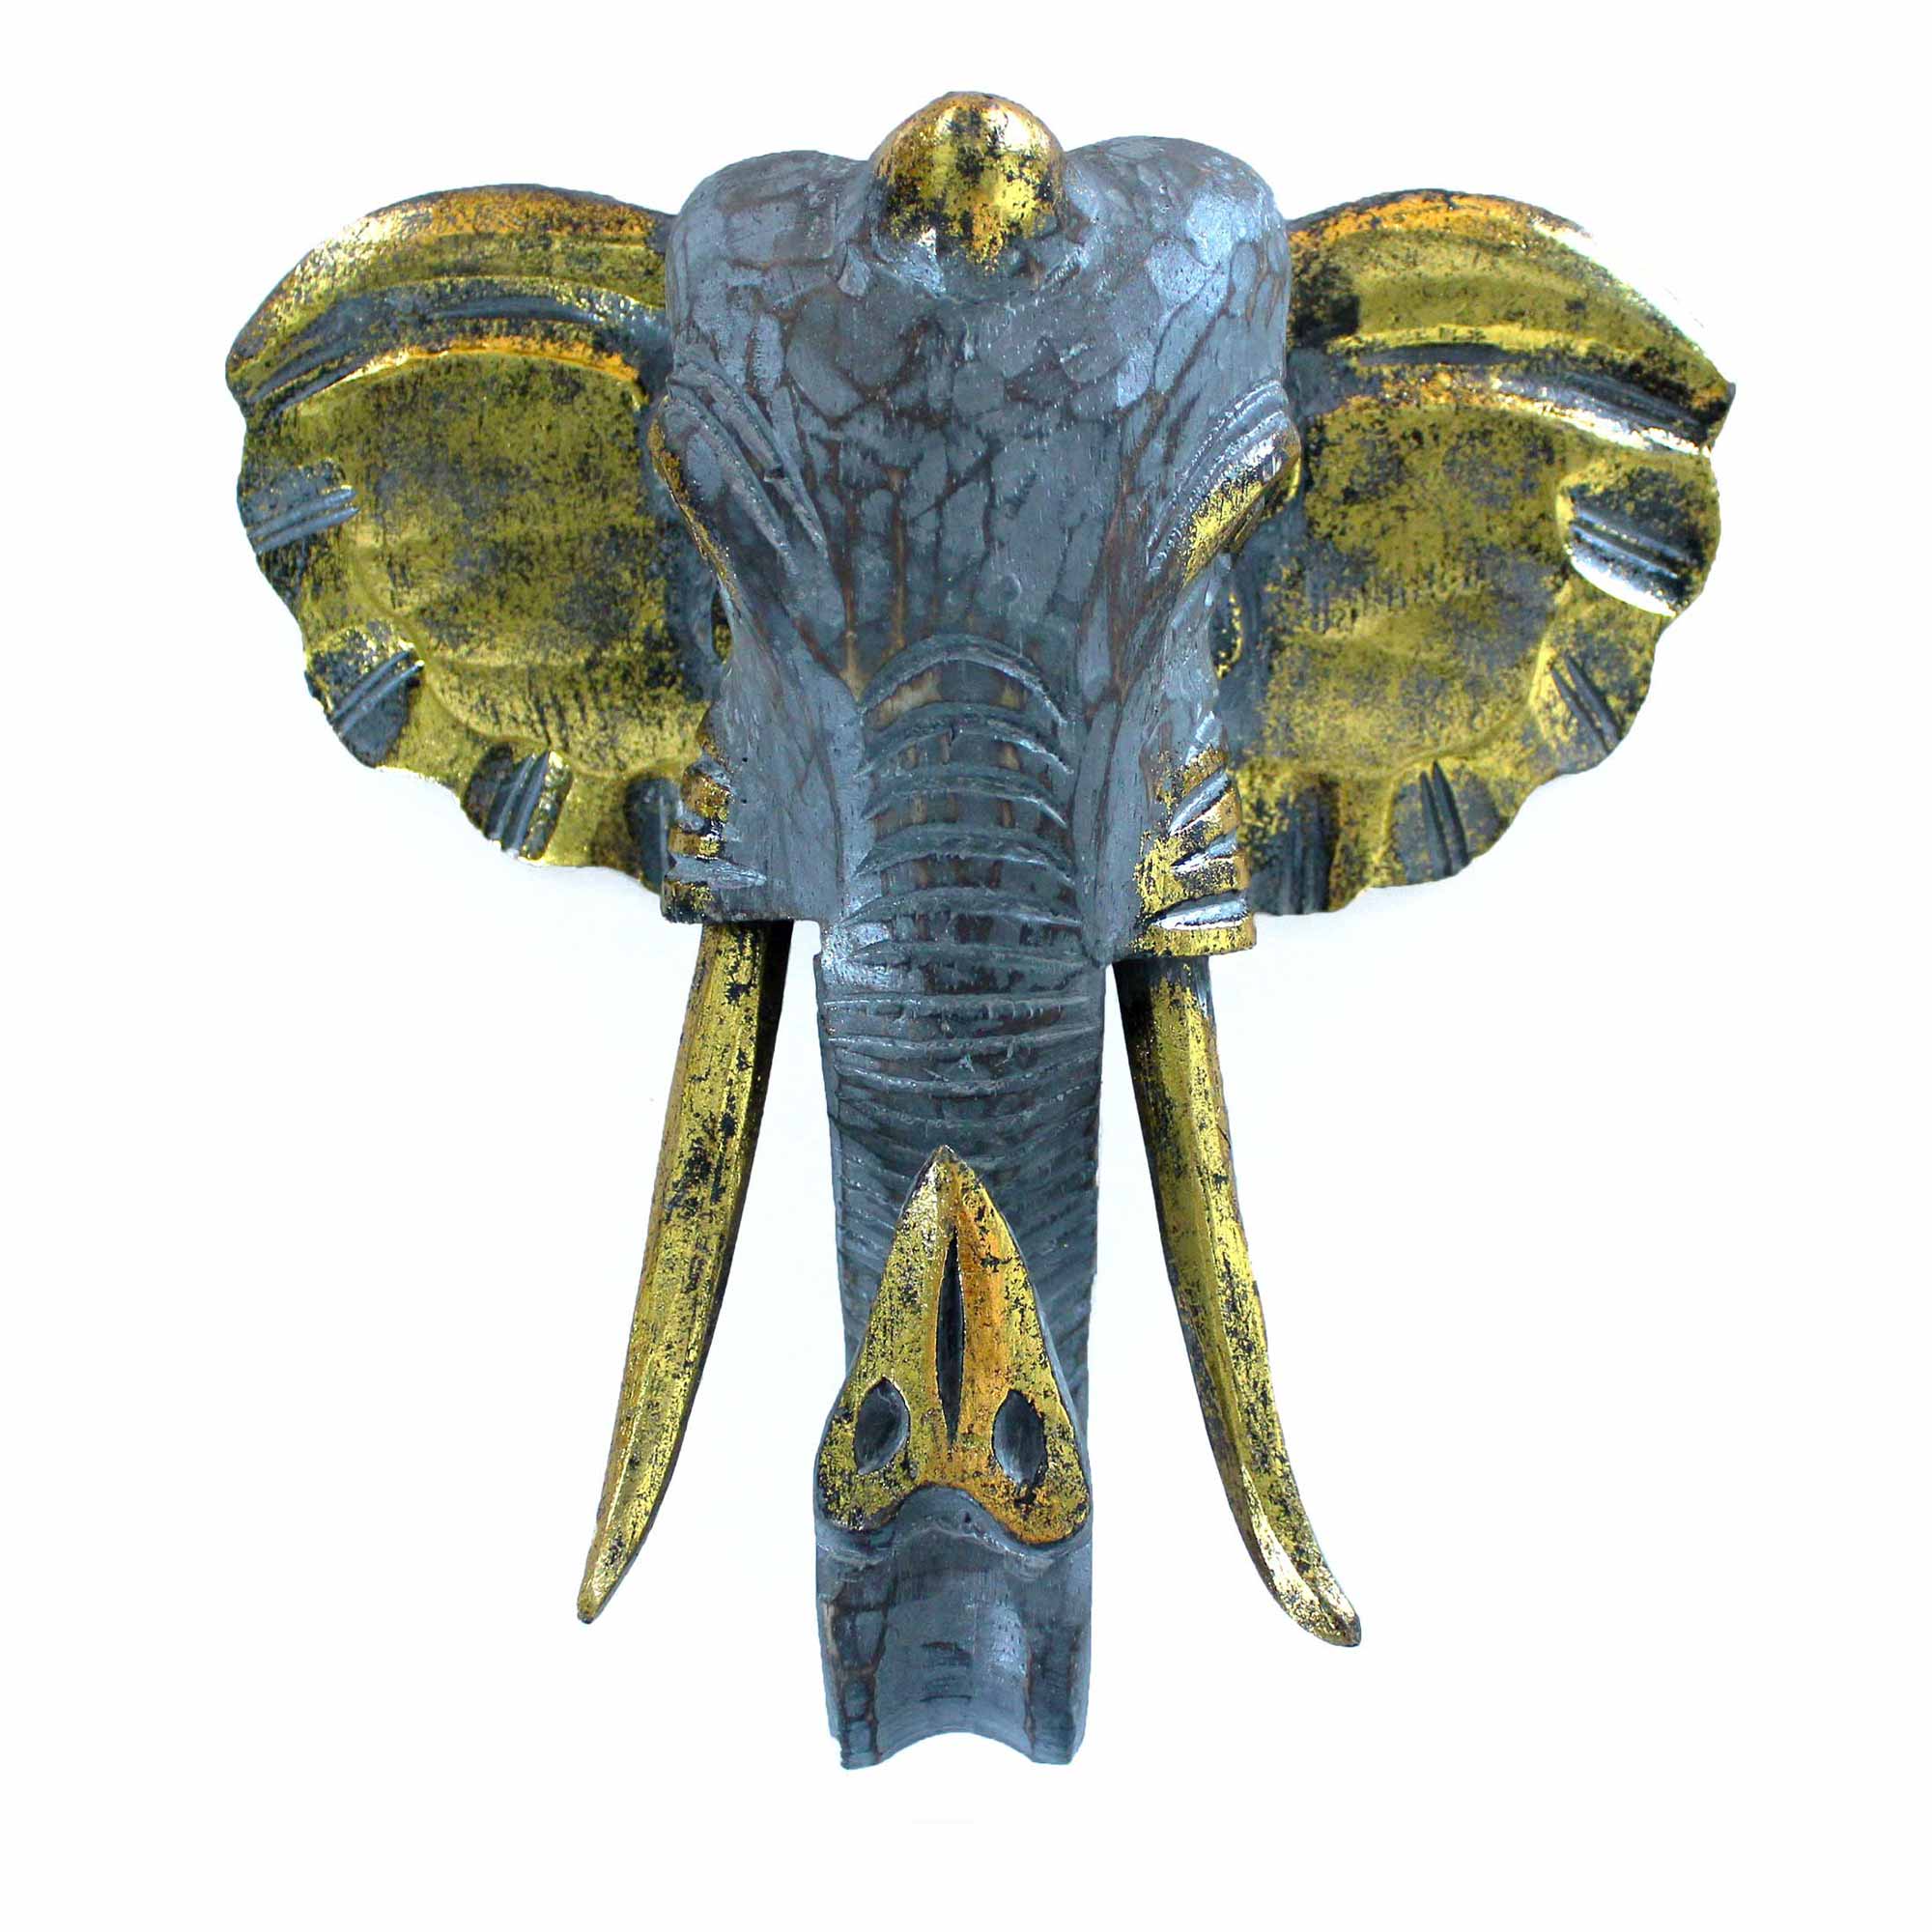 View Large Elephant Head Gold Grey information